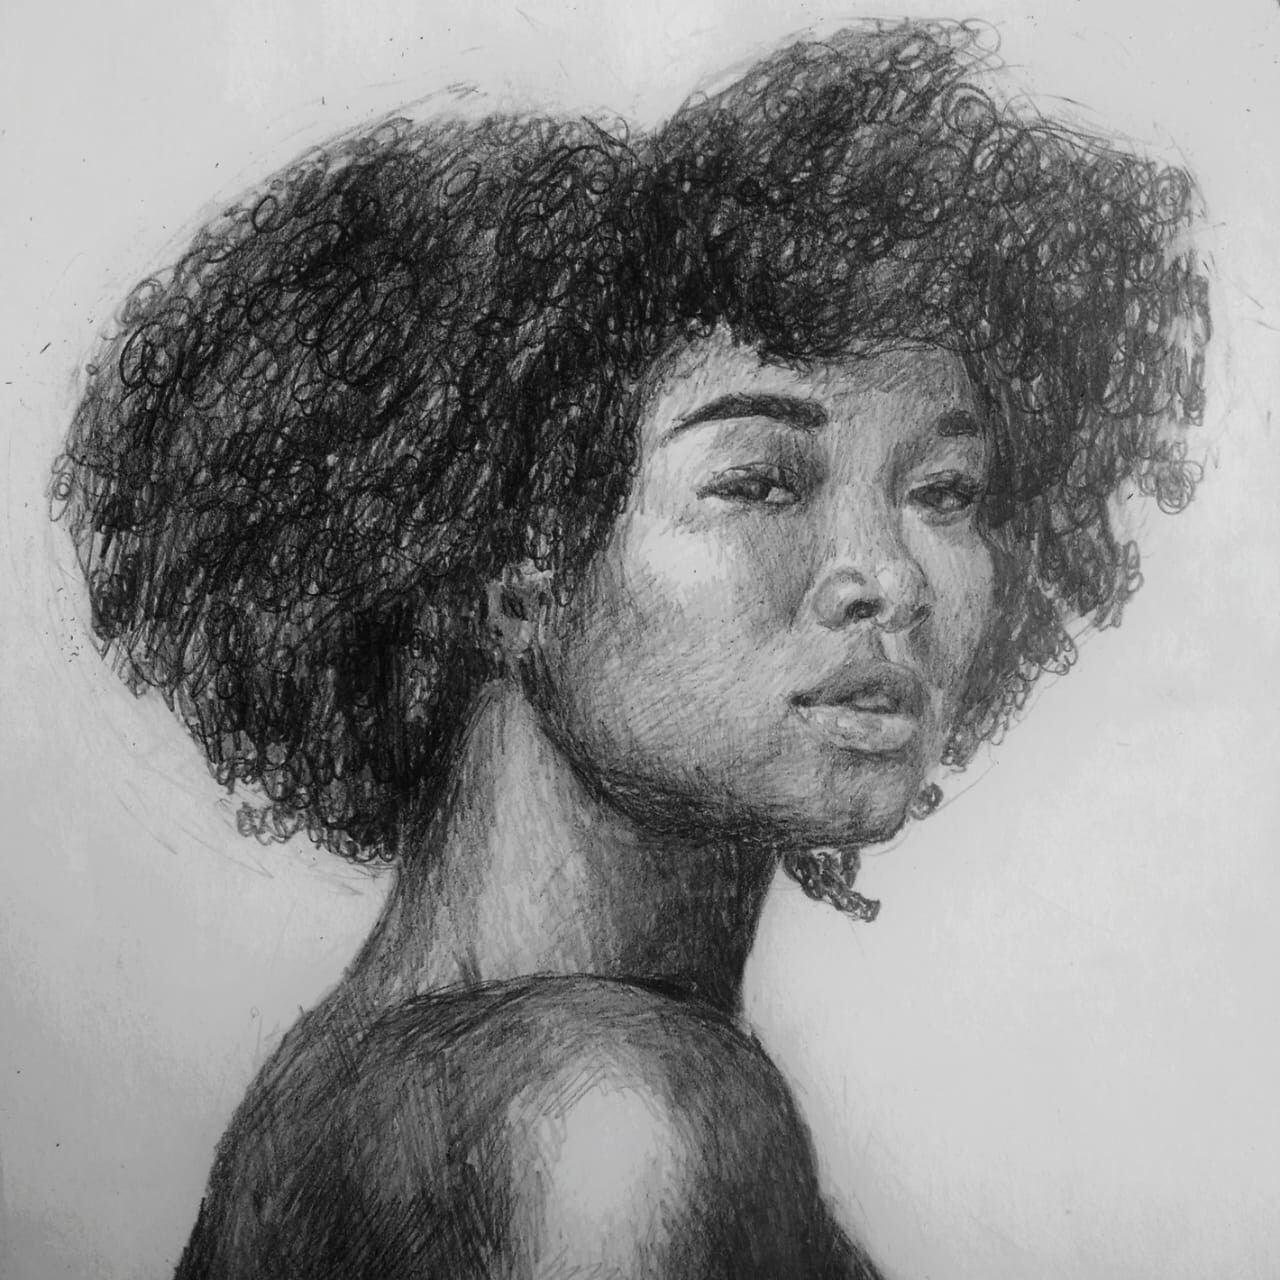 ArtStation - Some portraits with pencil and coal